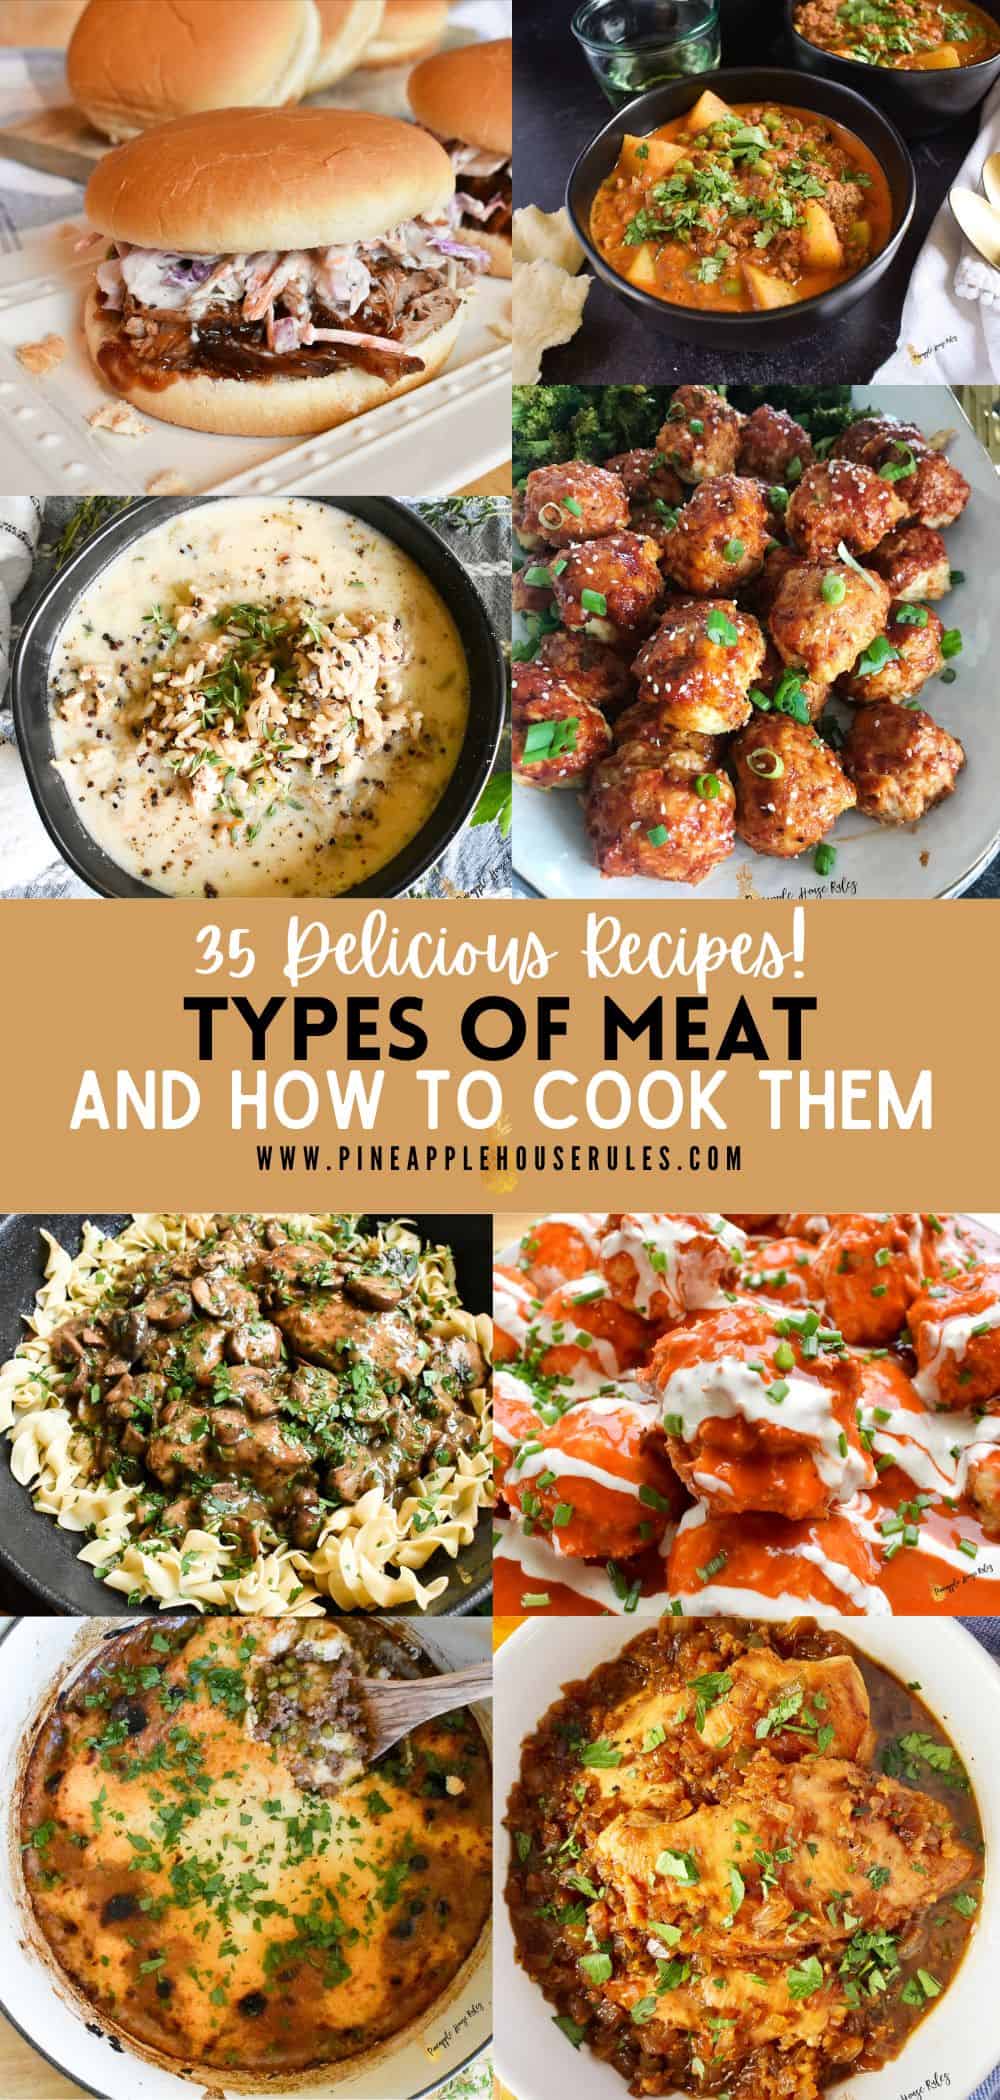 This post is all about different Types of Meat and How to Cook Them. Included are 35 recipes for cuts of beef, pork, and chicken. Each protein has its own unique flavors and ways to prepare. Beef Cuts | Meat Cooking Chart | Cooking Times | Cuts of Beef | How to Cook | Beef Recipes | Chicken Recipes | Ground Chicken Recipes | Ground Beef Recipes | Pork Recipes | Ground Chicken Recipes Healthy | Chicken Breast Recipes | Chicken Breast Recipes Healthy | Pork Tenderloin Recipes | Pork Recipes